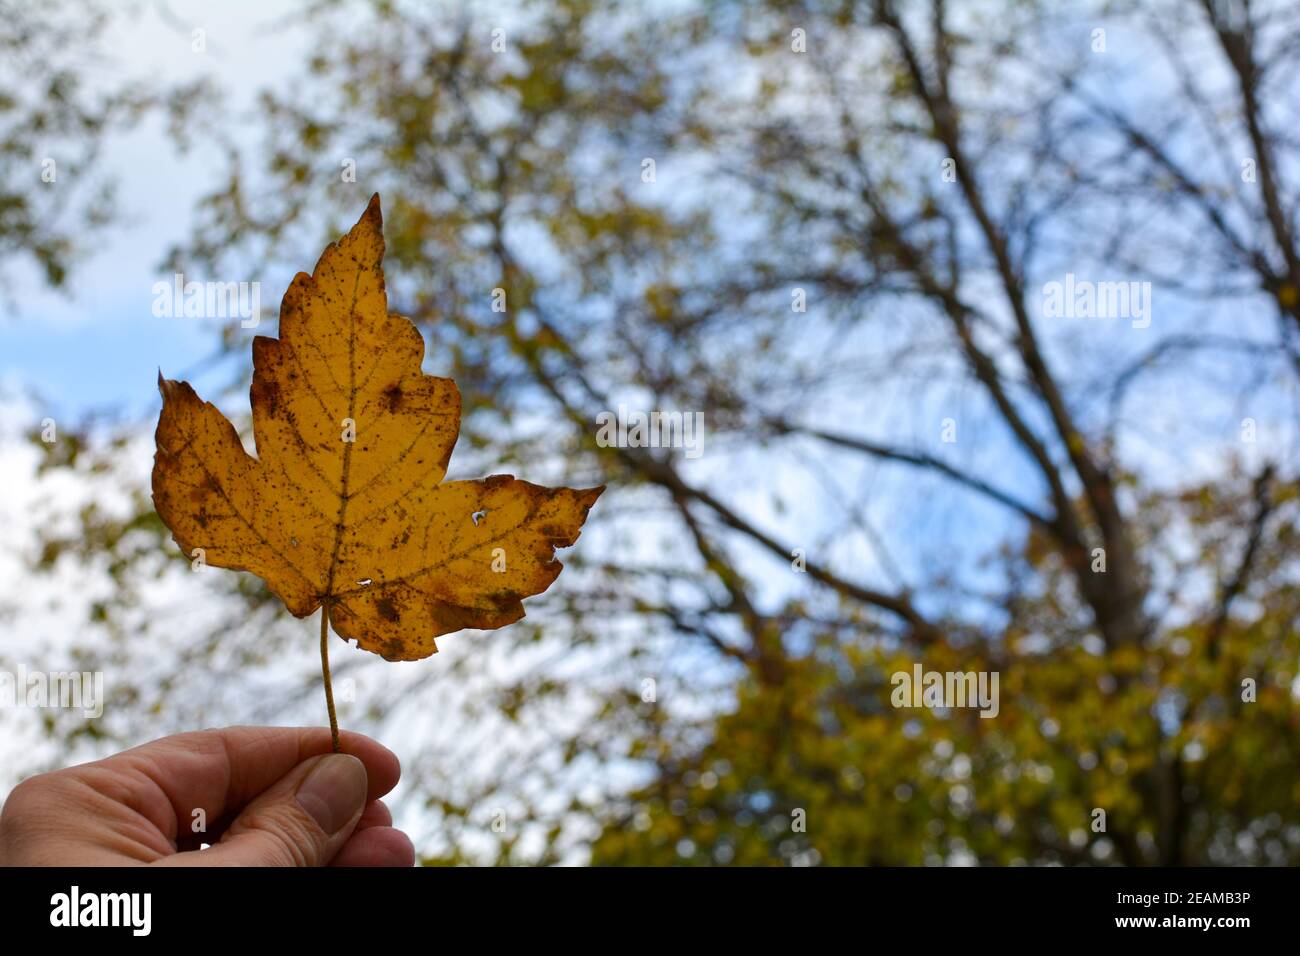 Hand holds a autumn leaf in front of nature Stock Photo